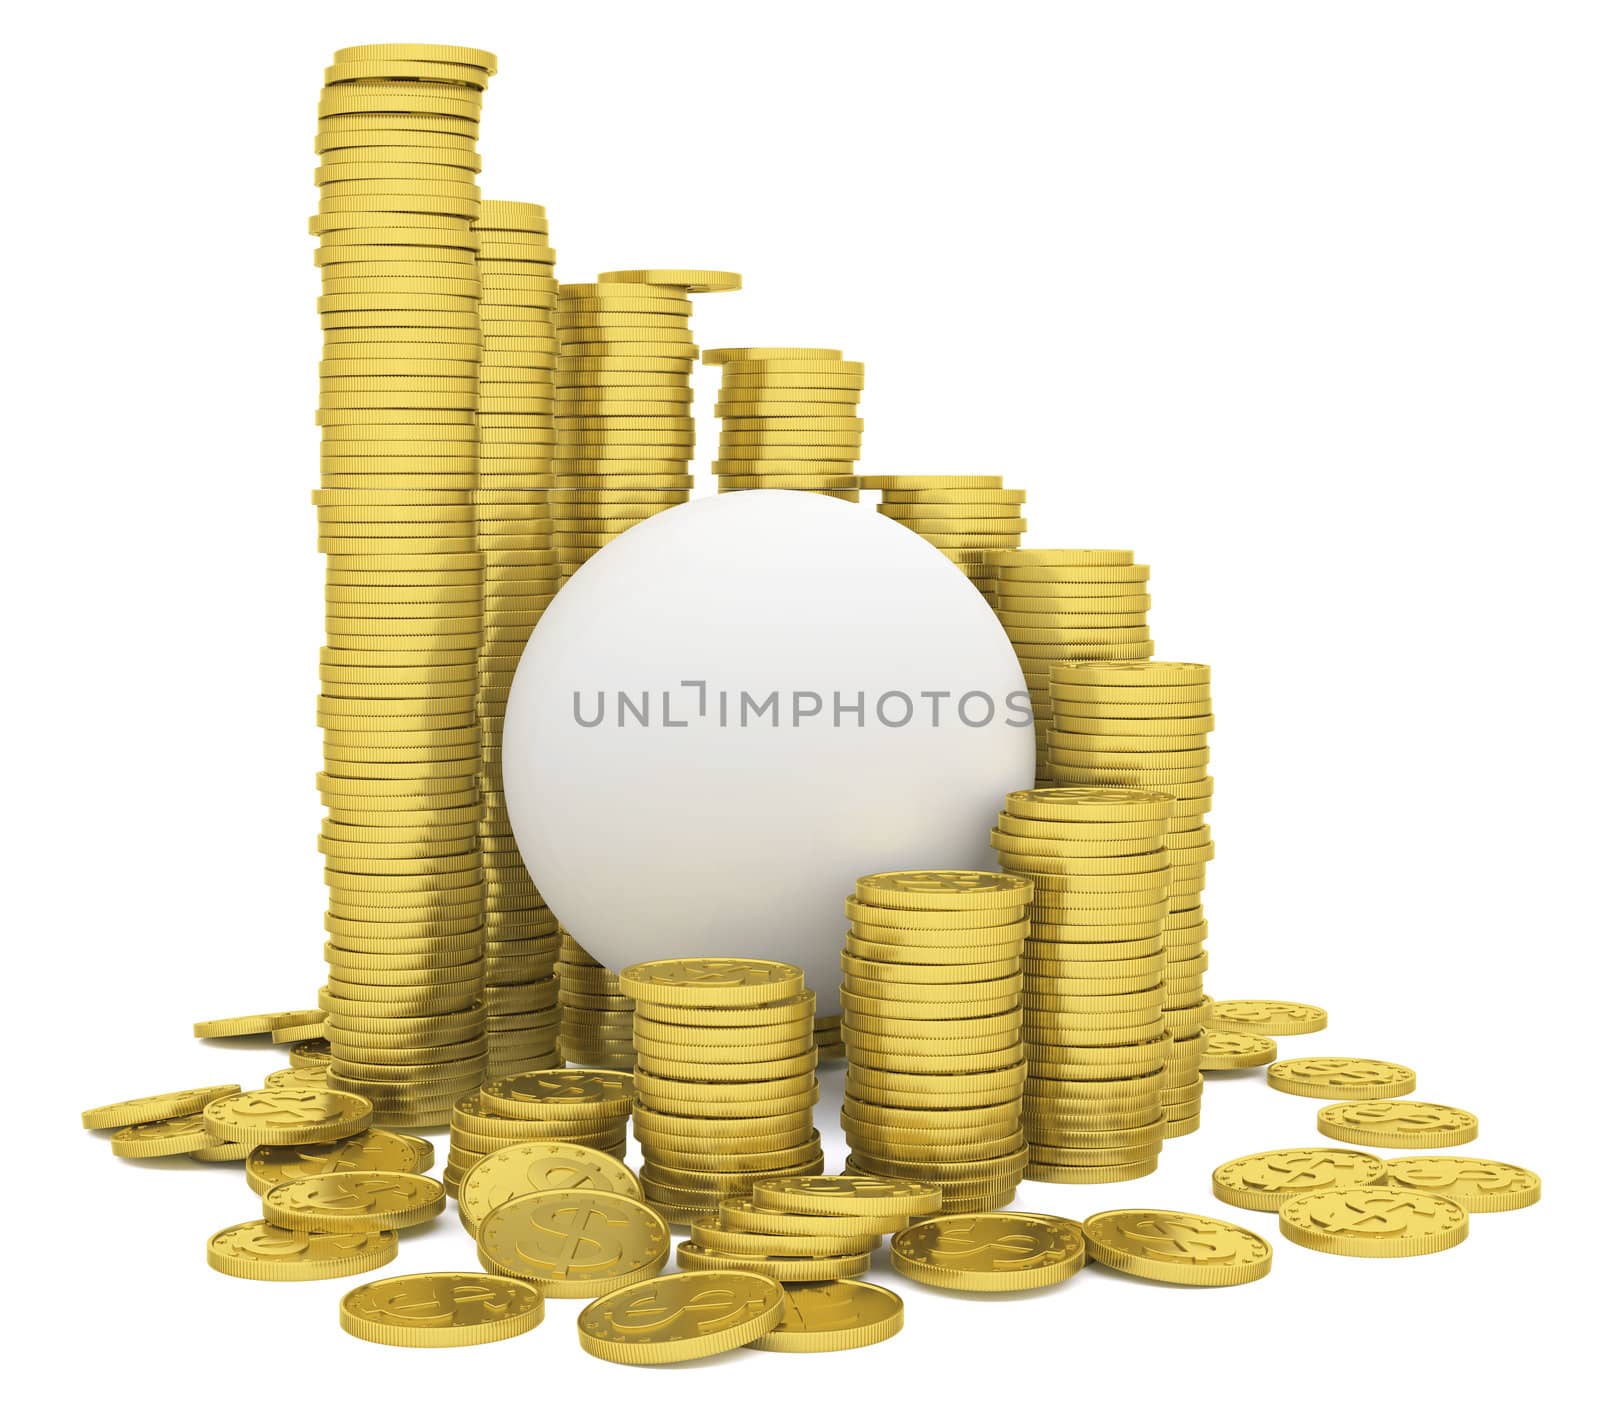 Sphere inside a stack of gold coins. Isolated render on a white background